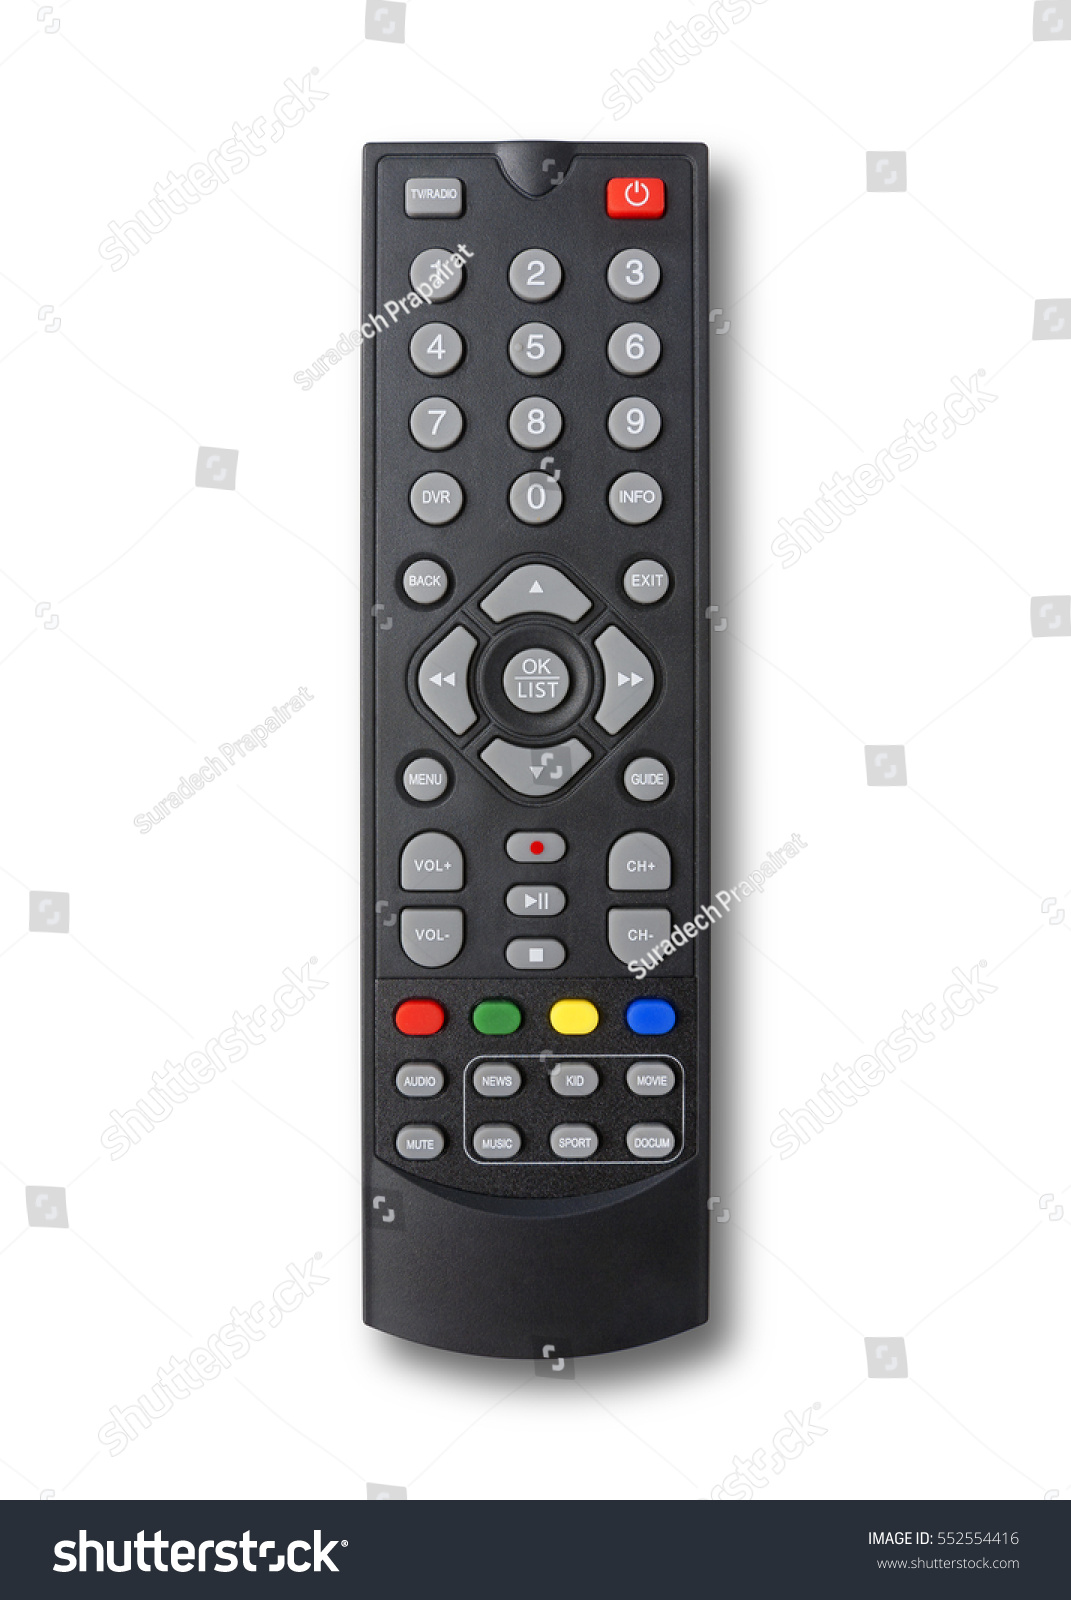 Remote control isolated on white background and shadow with clipping path #552554416